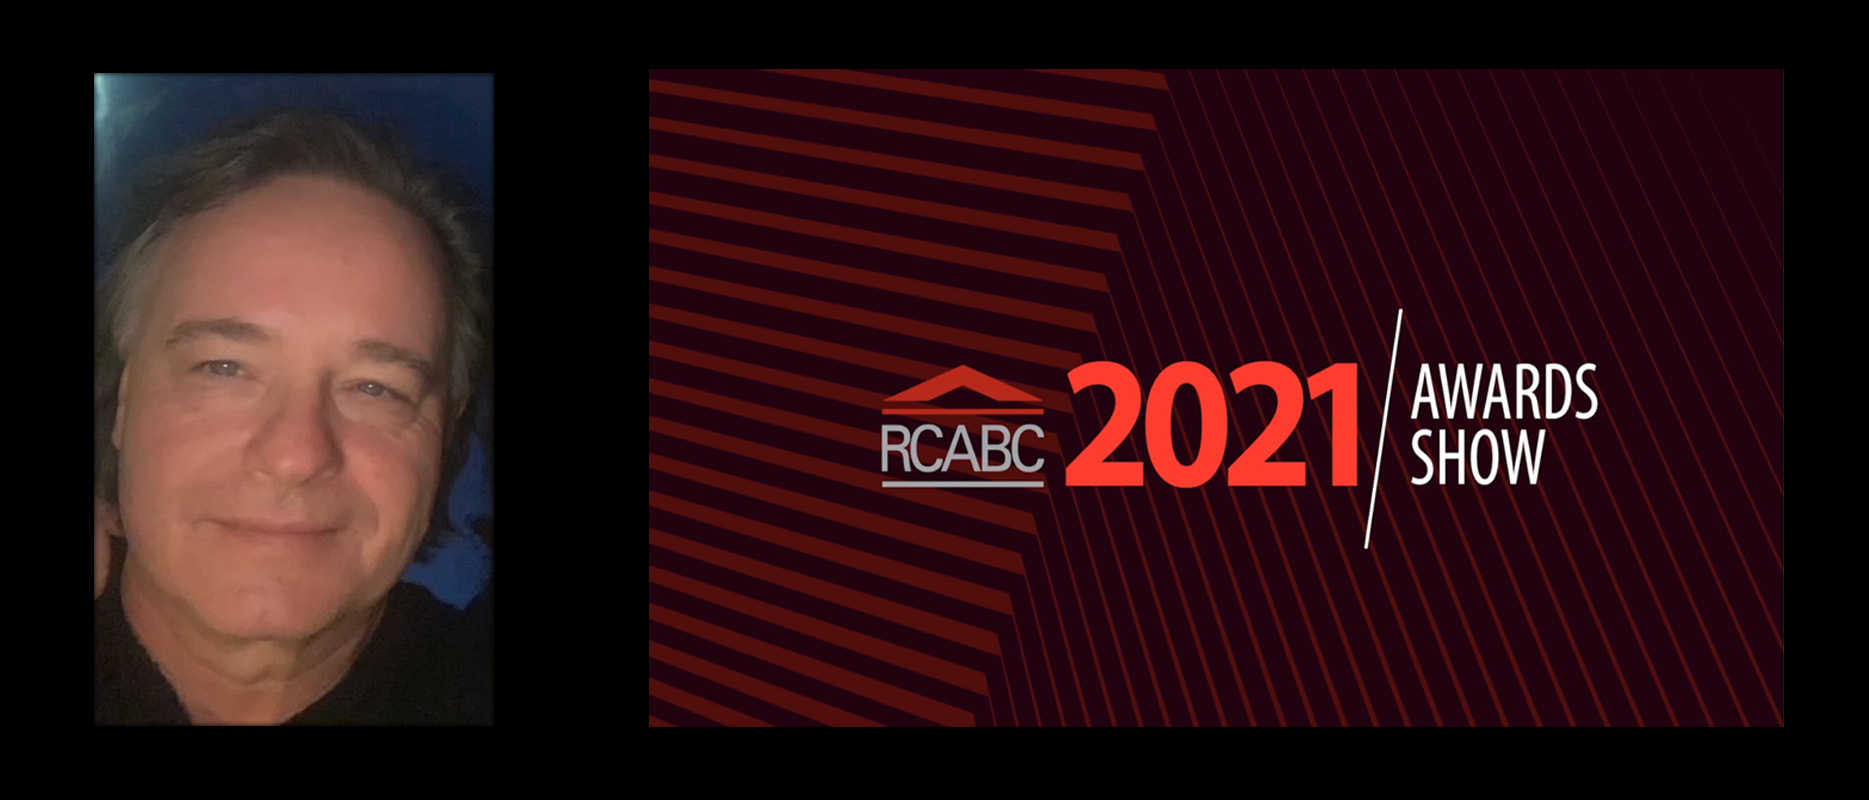 A picture of Rick Solecki and the RCABC awards logo